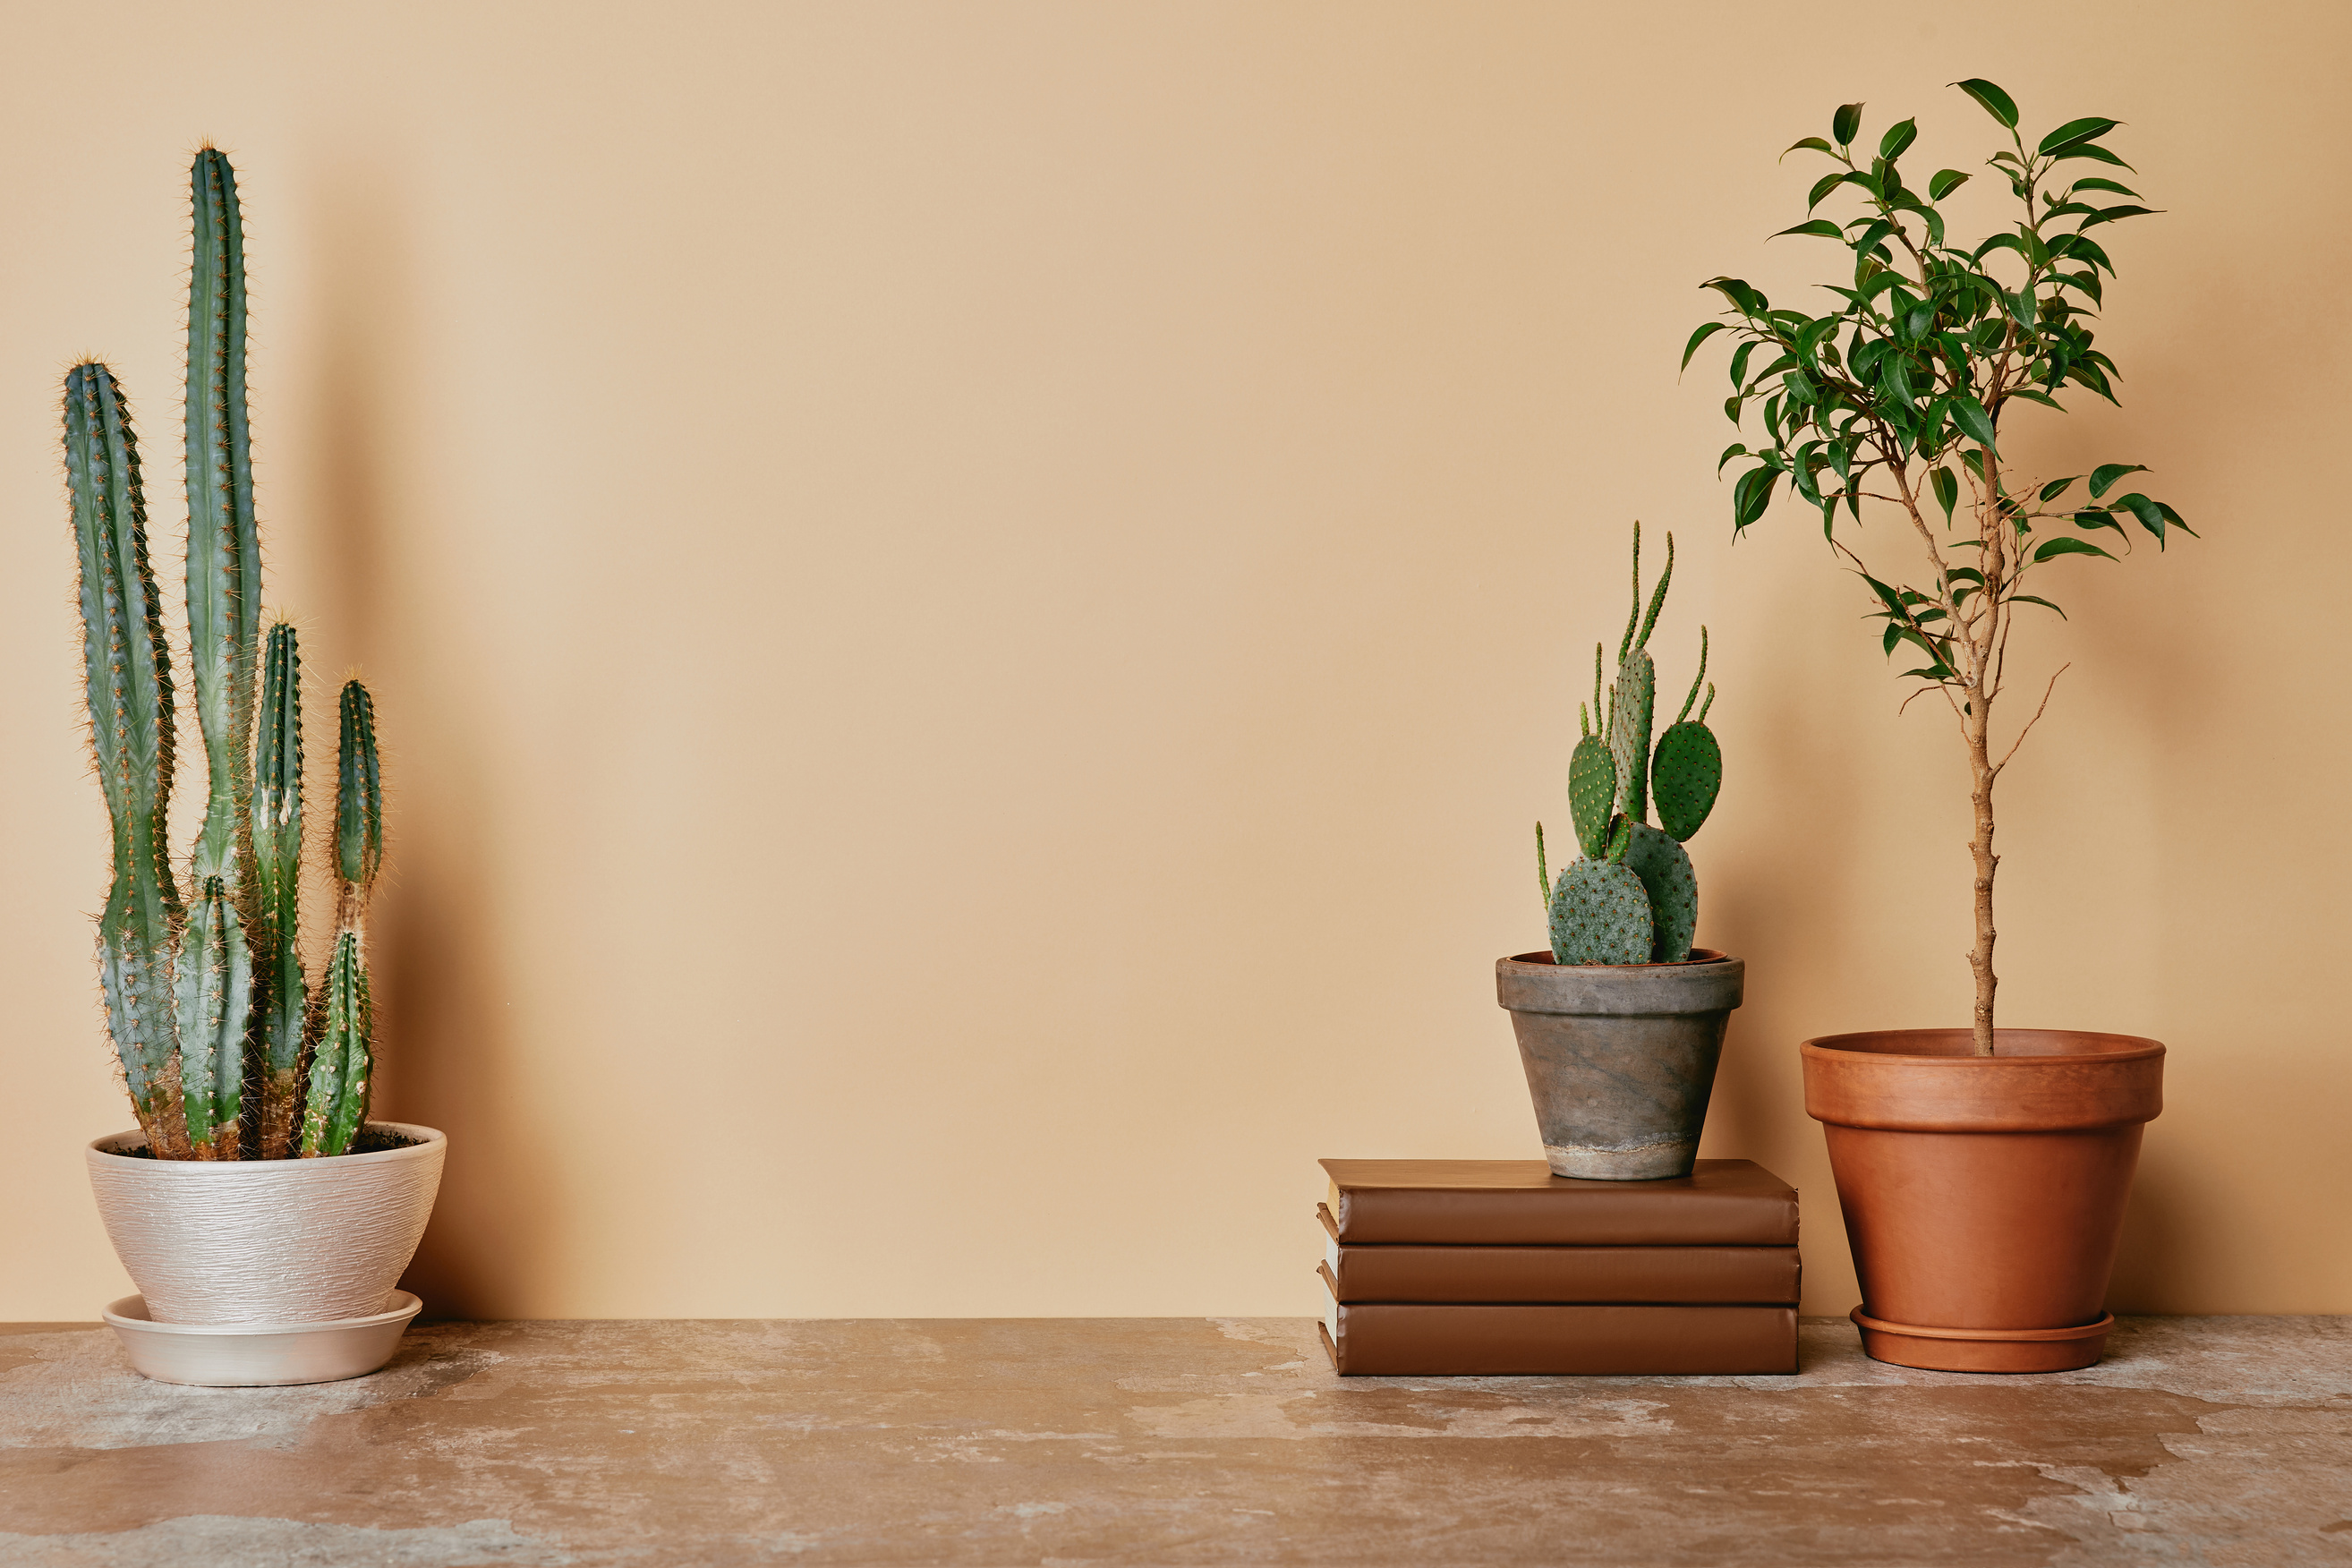 Different plants and books on beige background